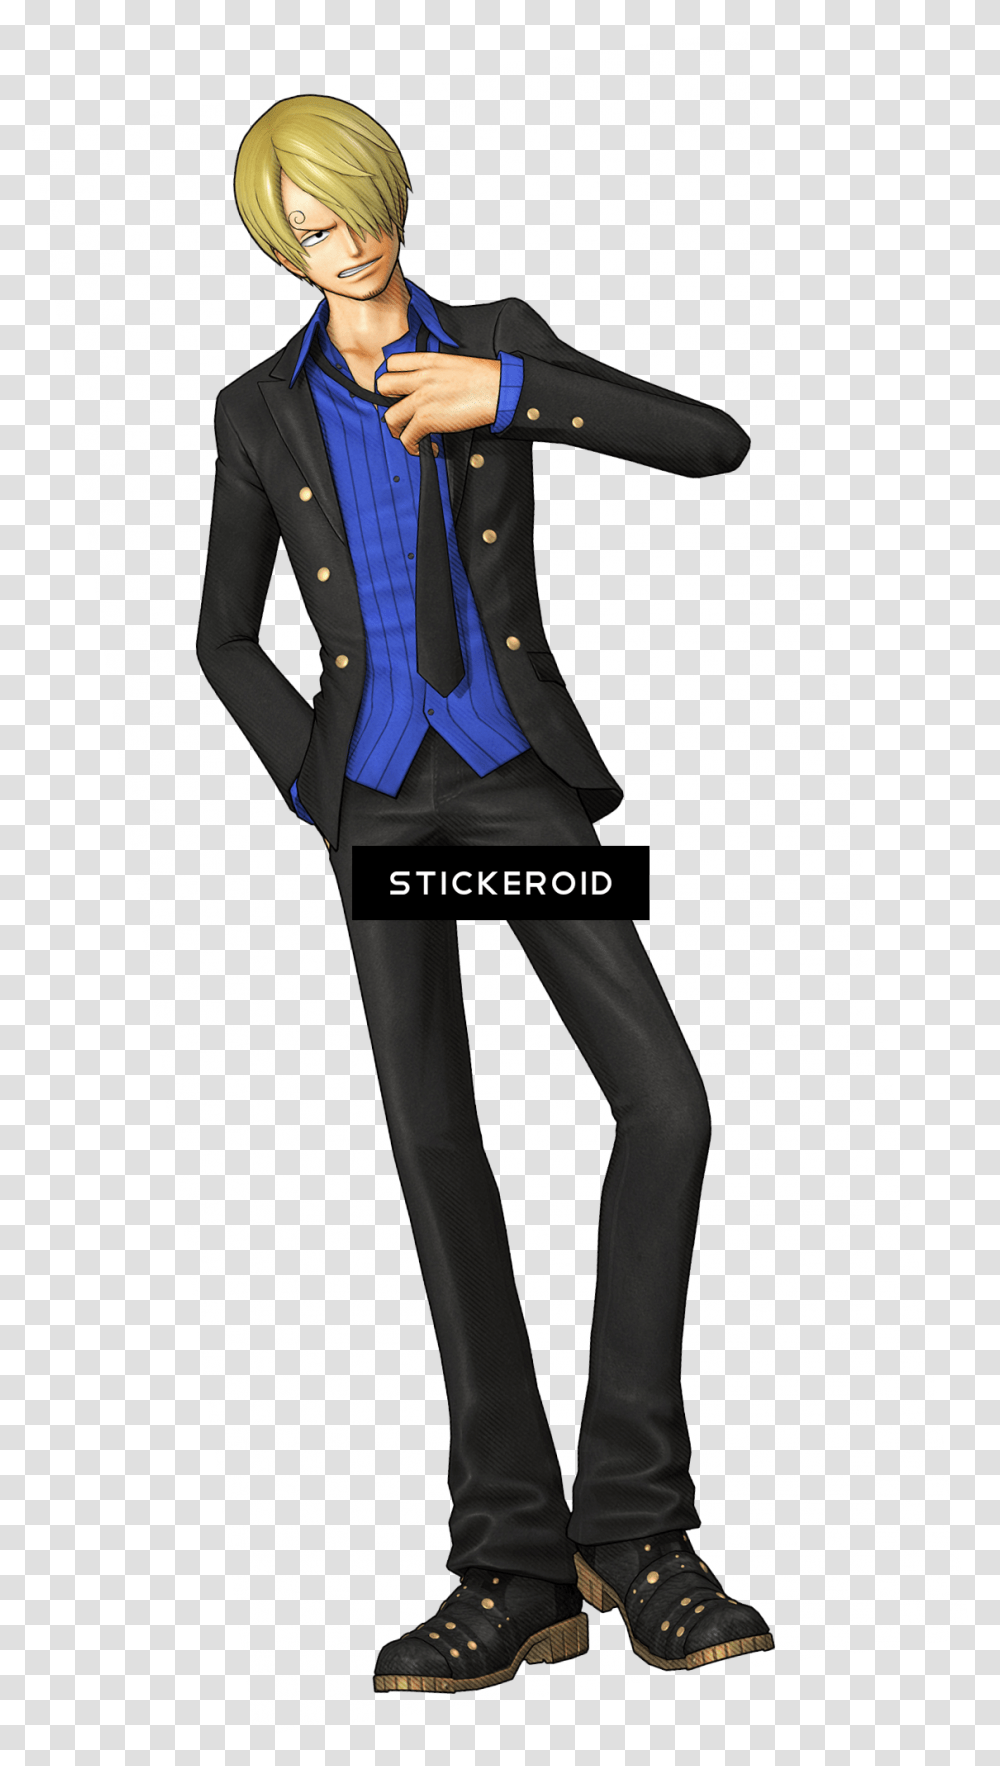 One Piece Sanji Pic Manga Image Cartoon, Clothing, Suit, Overcoat, Person Transparent Png